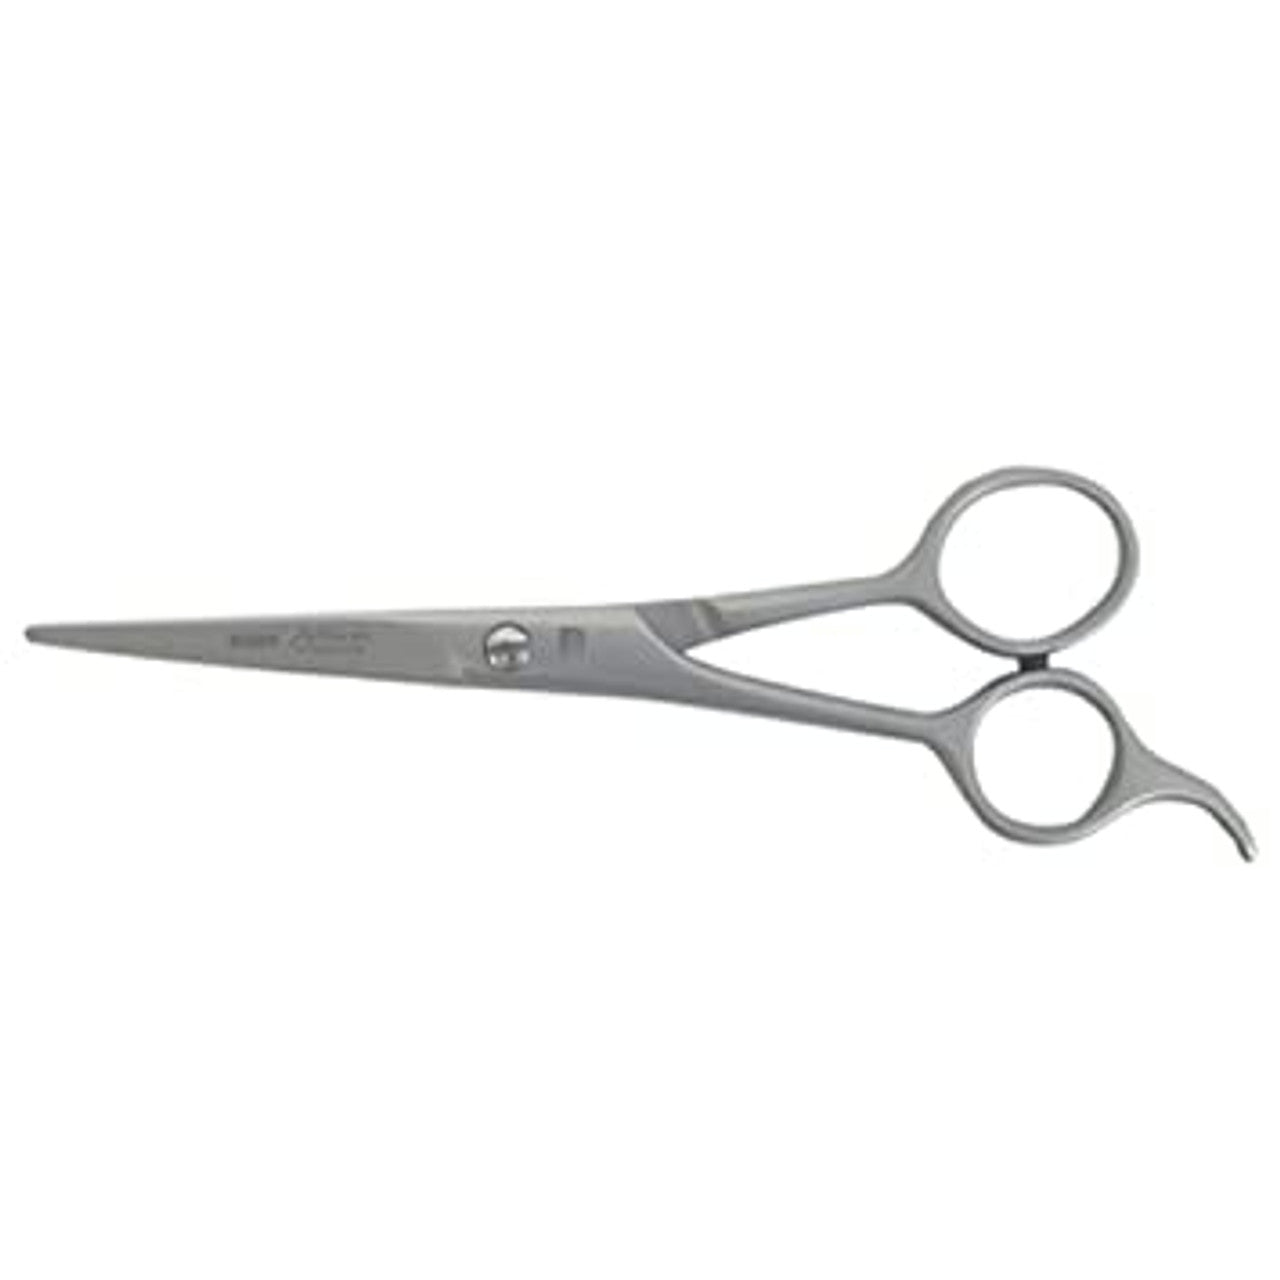 Scalpmaster Ice Tempered Shears w/ Finger Rests - 6.5in.